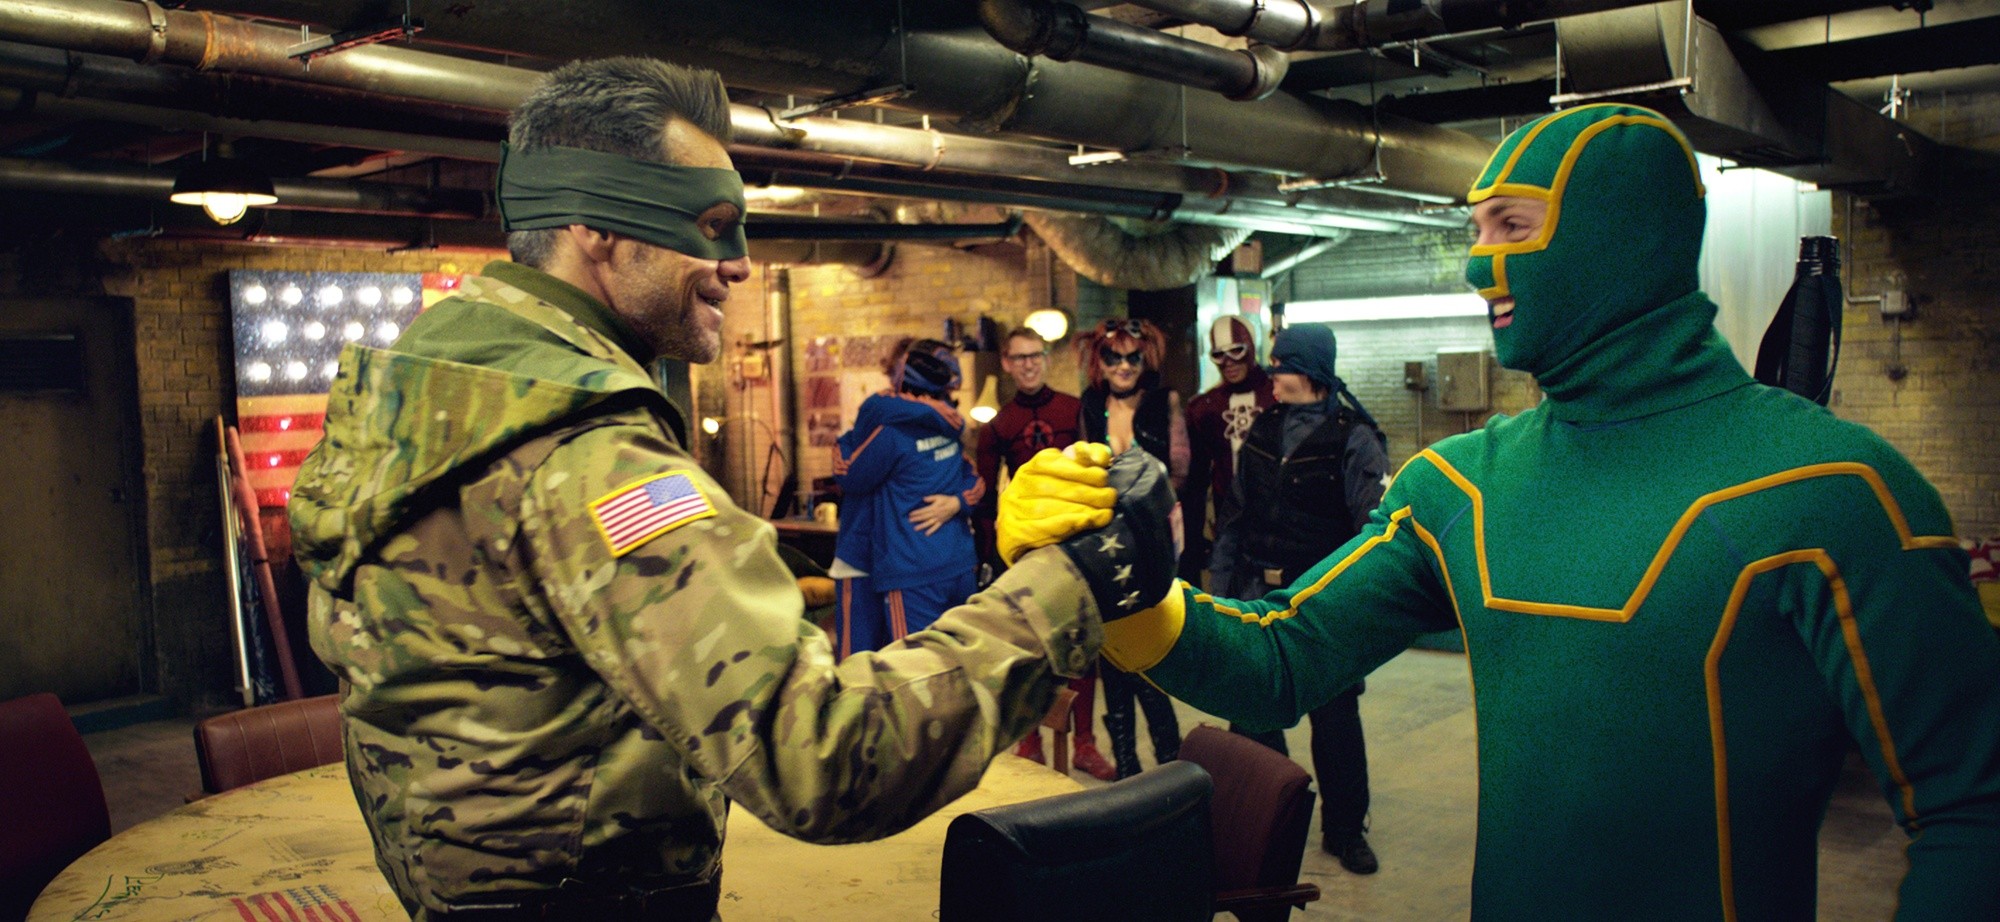 Jim Carrey stars as Colonel Stars and Stripes and Aaron Johnson stars as Dave Lizewski/Kick-Ass in Universal Pictures' Kick-Ass 2 (2013)